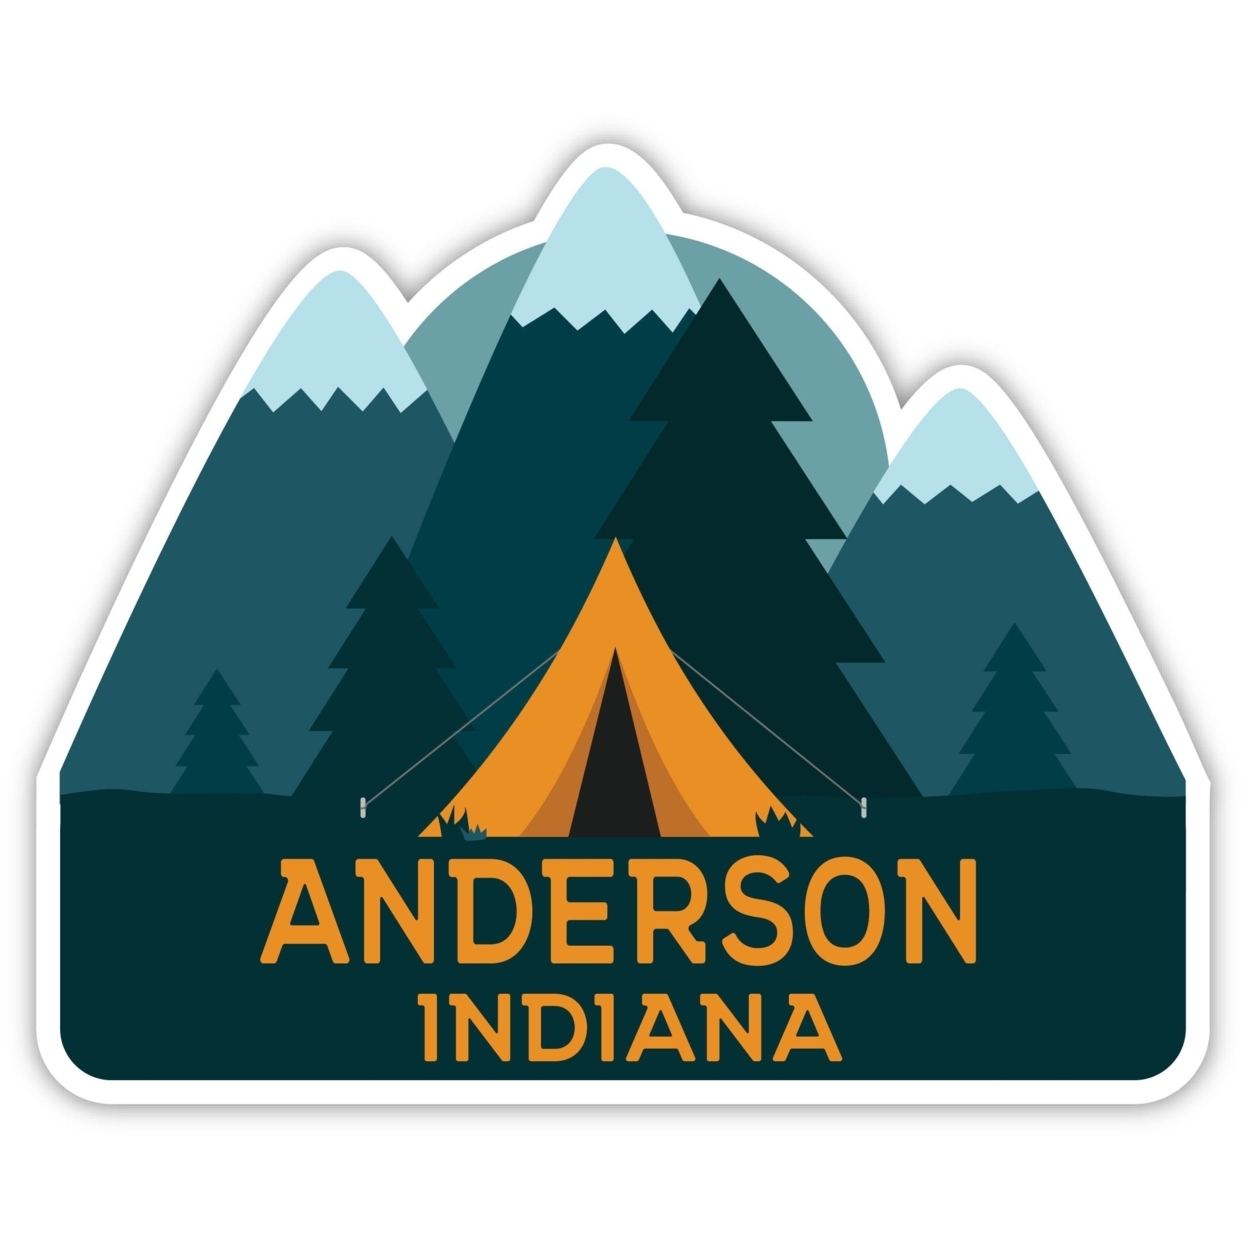 Anderson Indiana Souvenir Decorative Stickers (Choose Theme And Size) - 4-Pack, 2-Inch, Tent